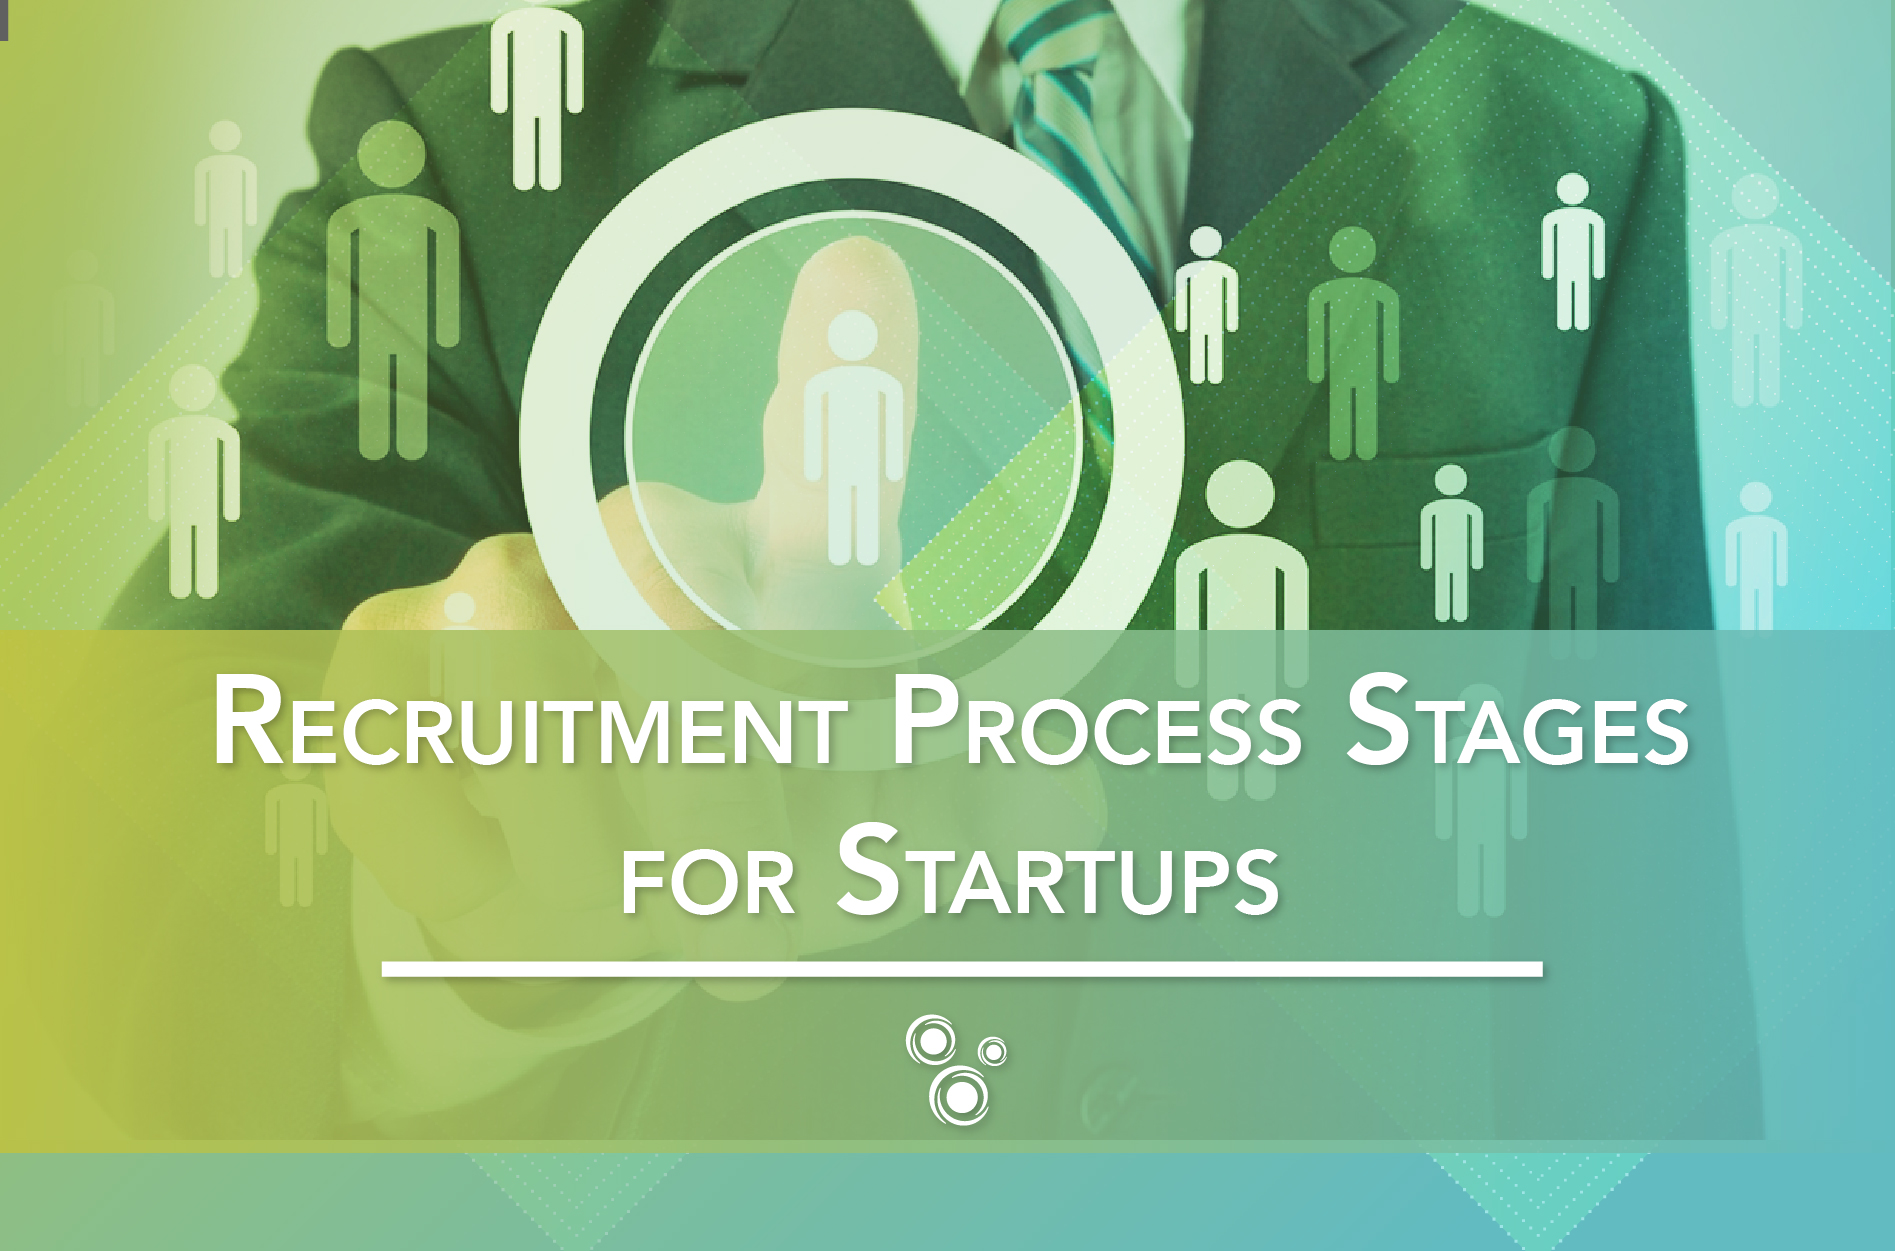 Recruitment Process Stages for Startups